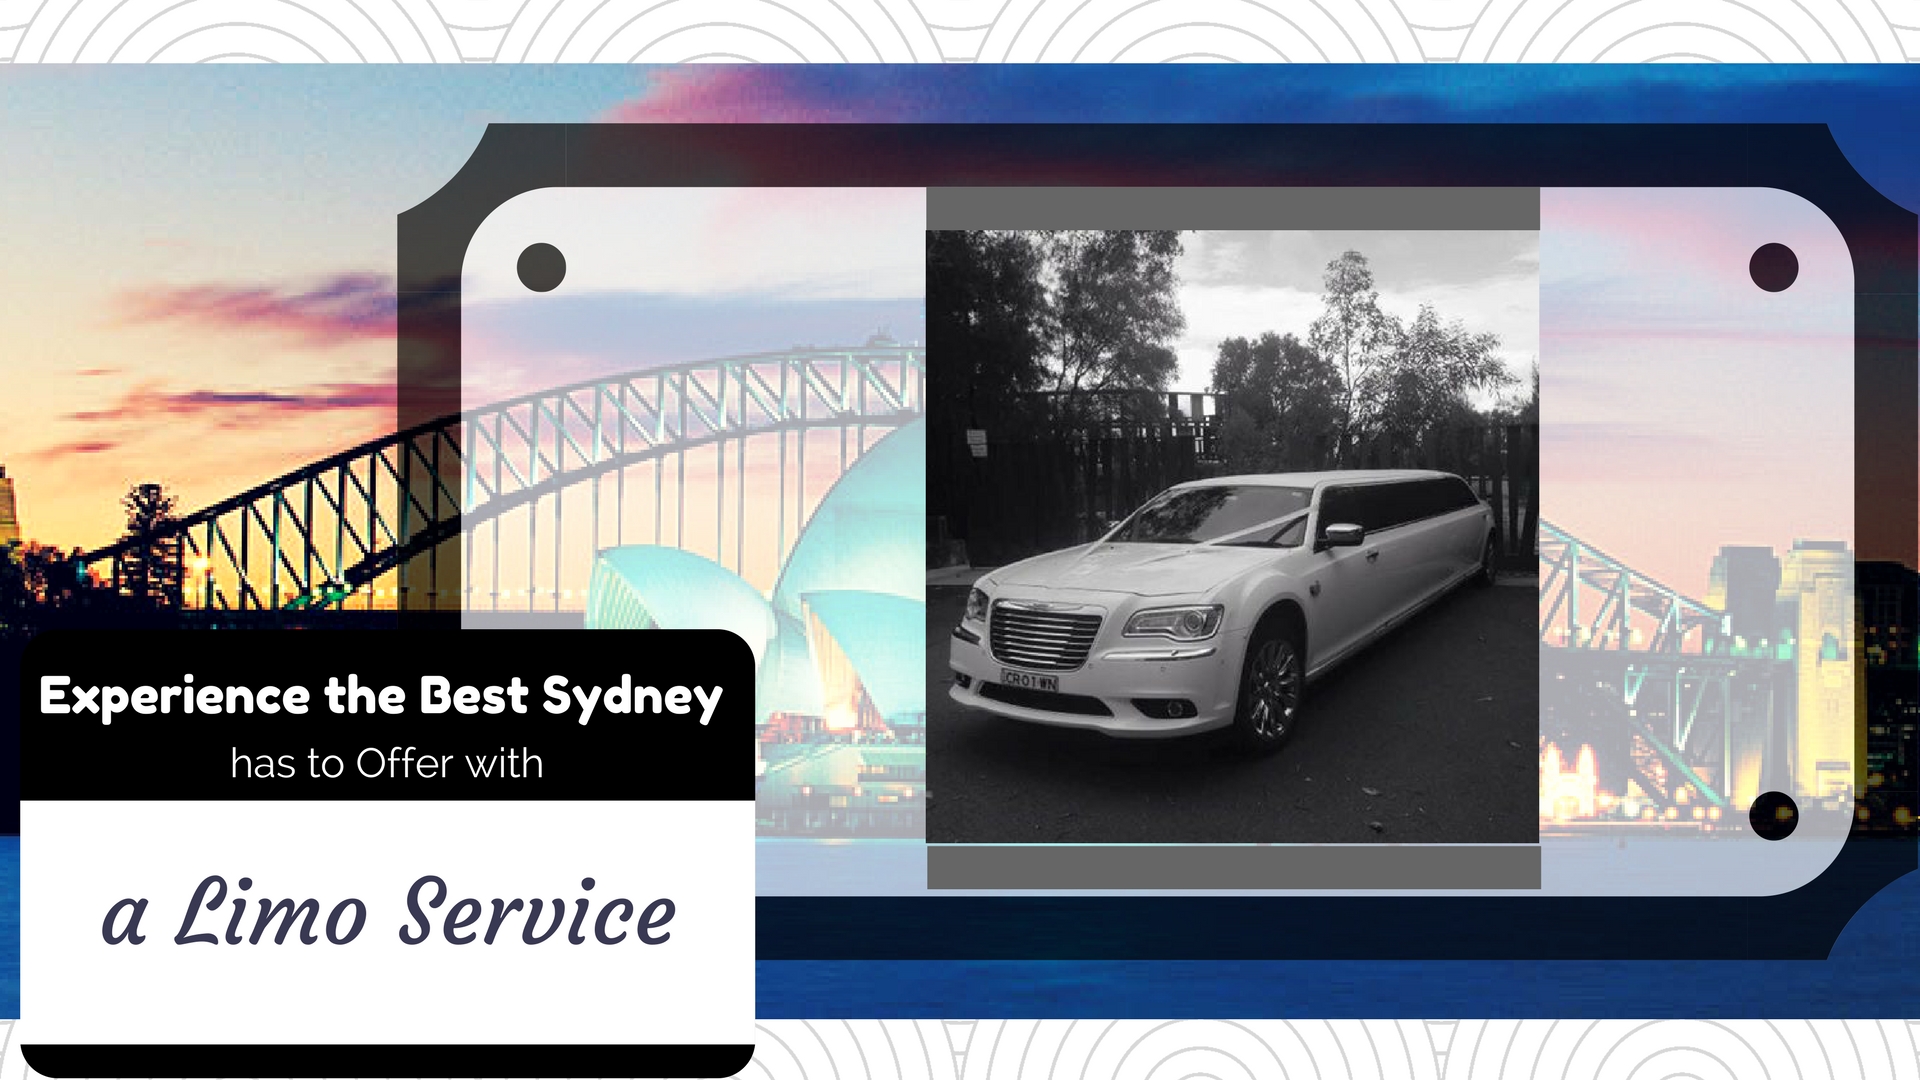  Experience the Best Sydney has to Offer with a Limo Service